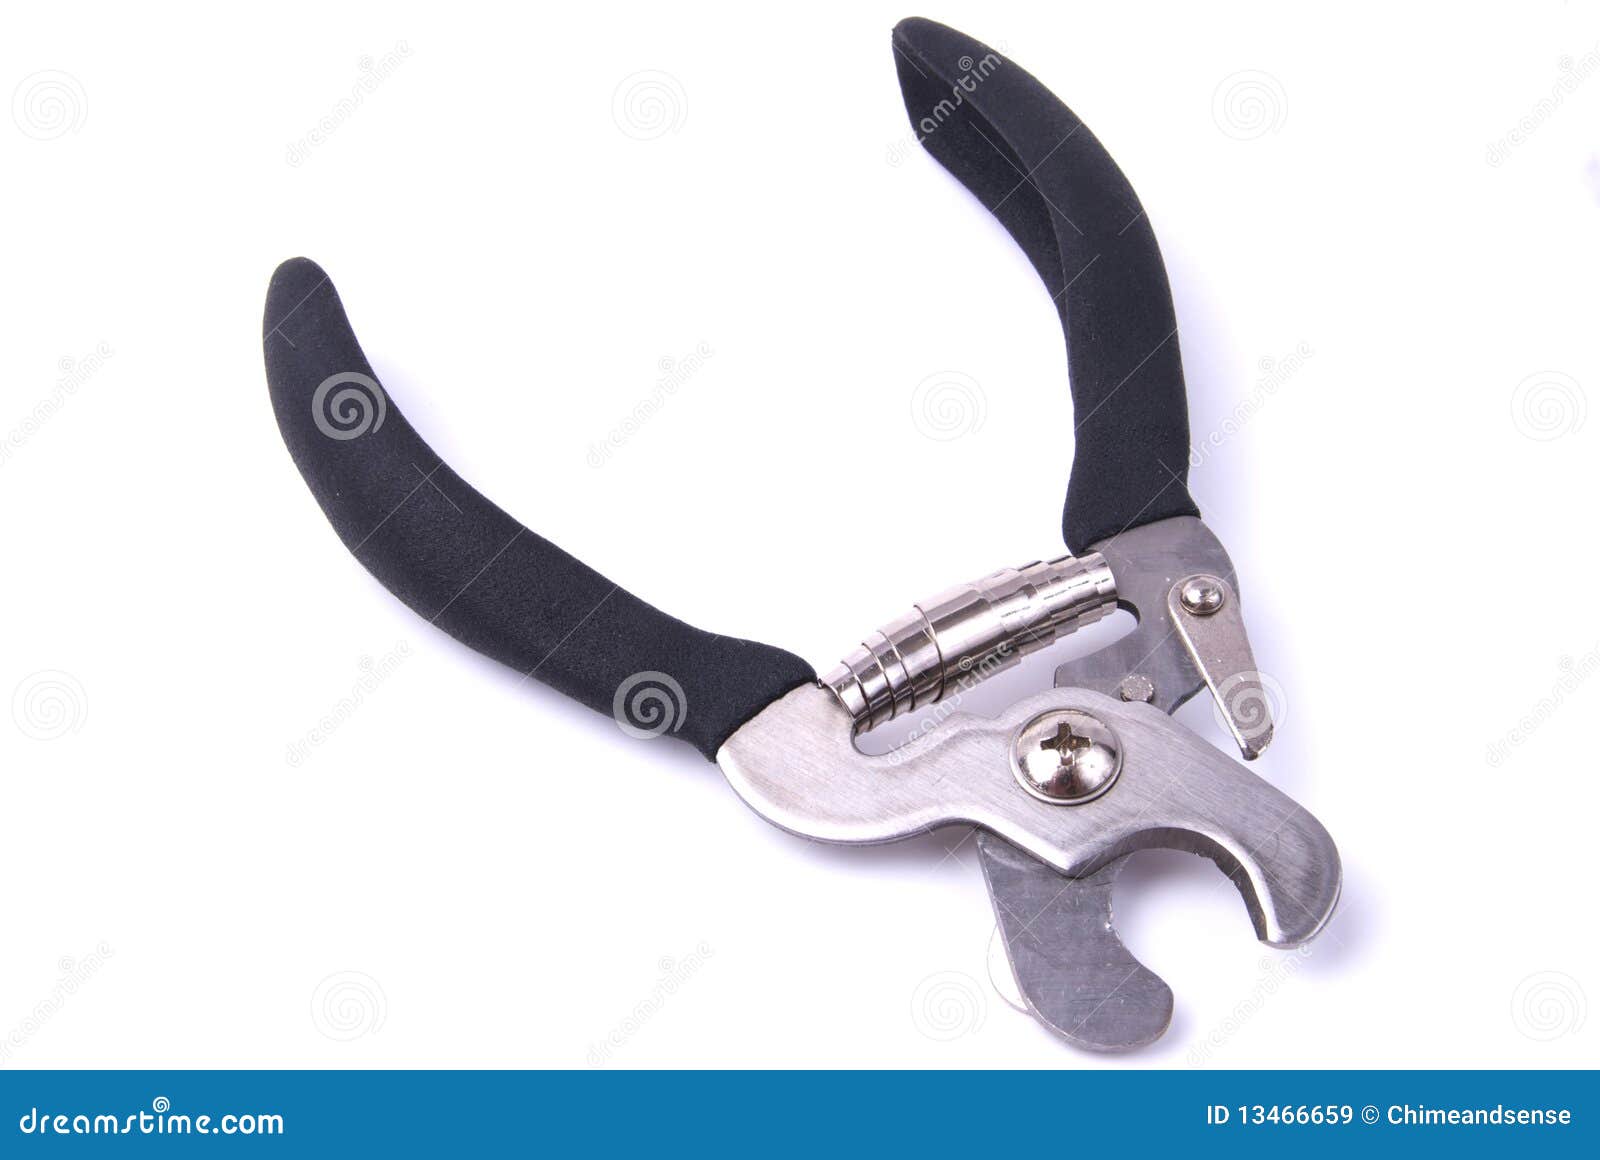 324 Dog Nail Clippers Stock Photos - Free & Royalty-Free Stock Photos from  Dreamstime